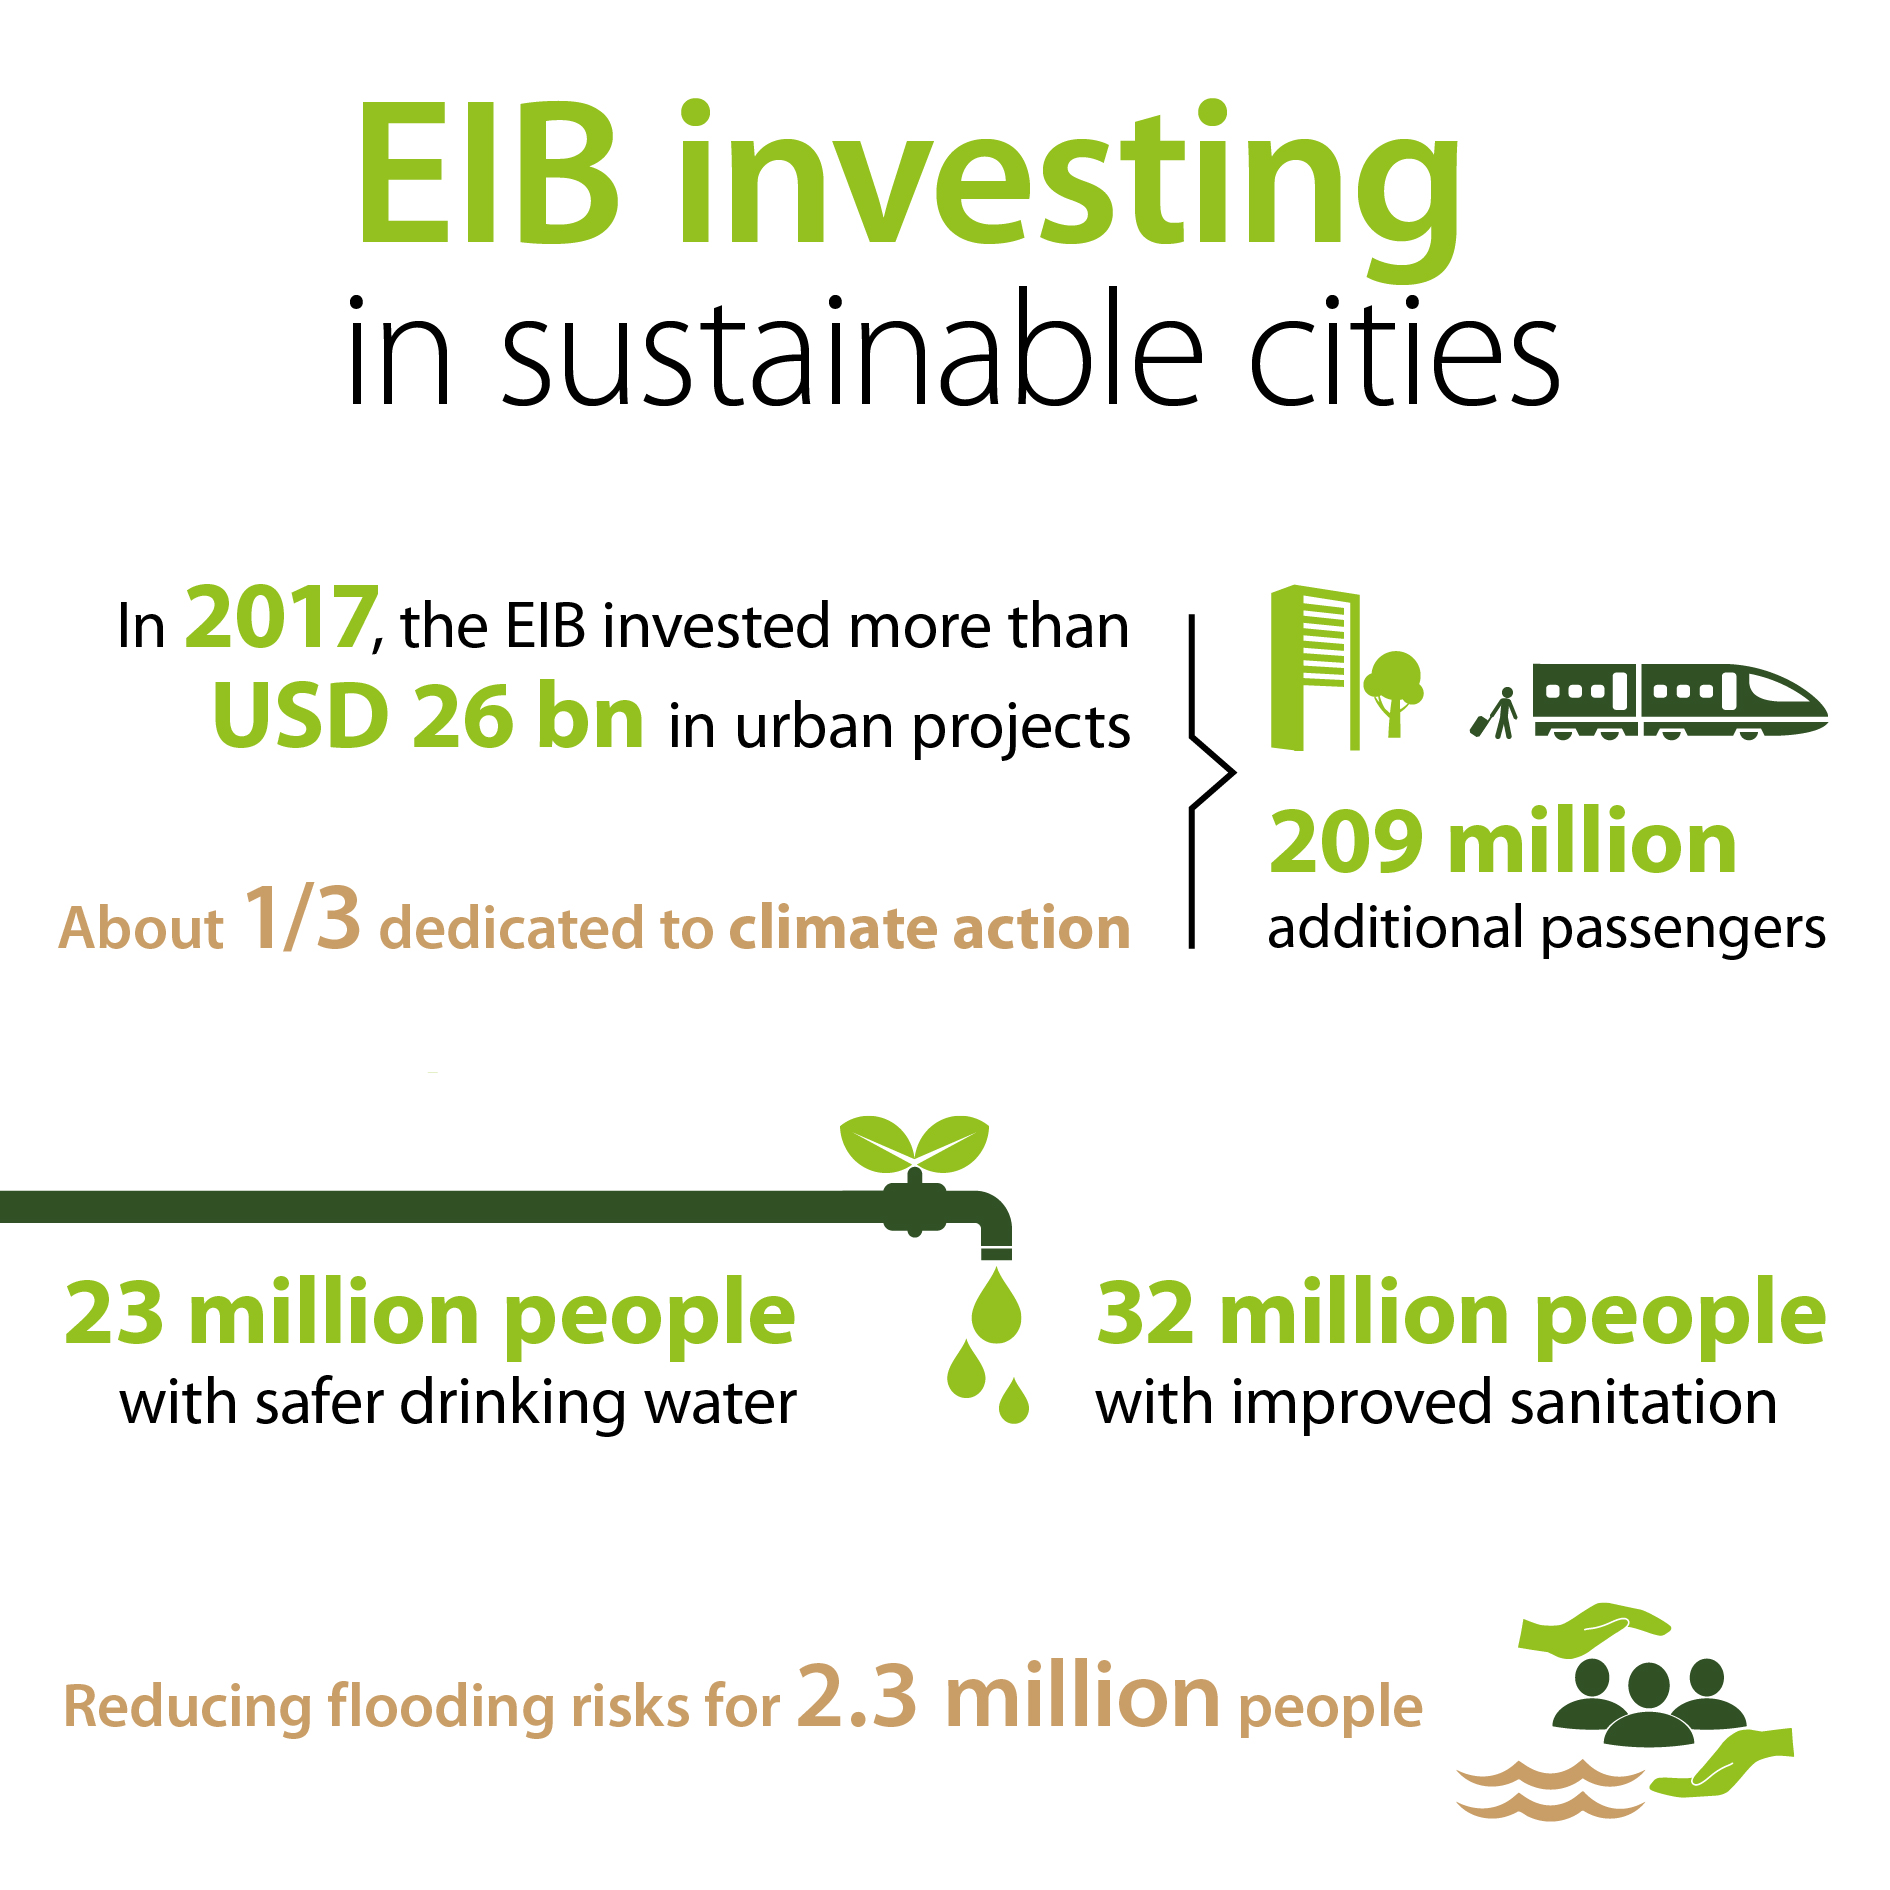 EIB investing in sustainable cities